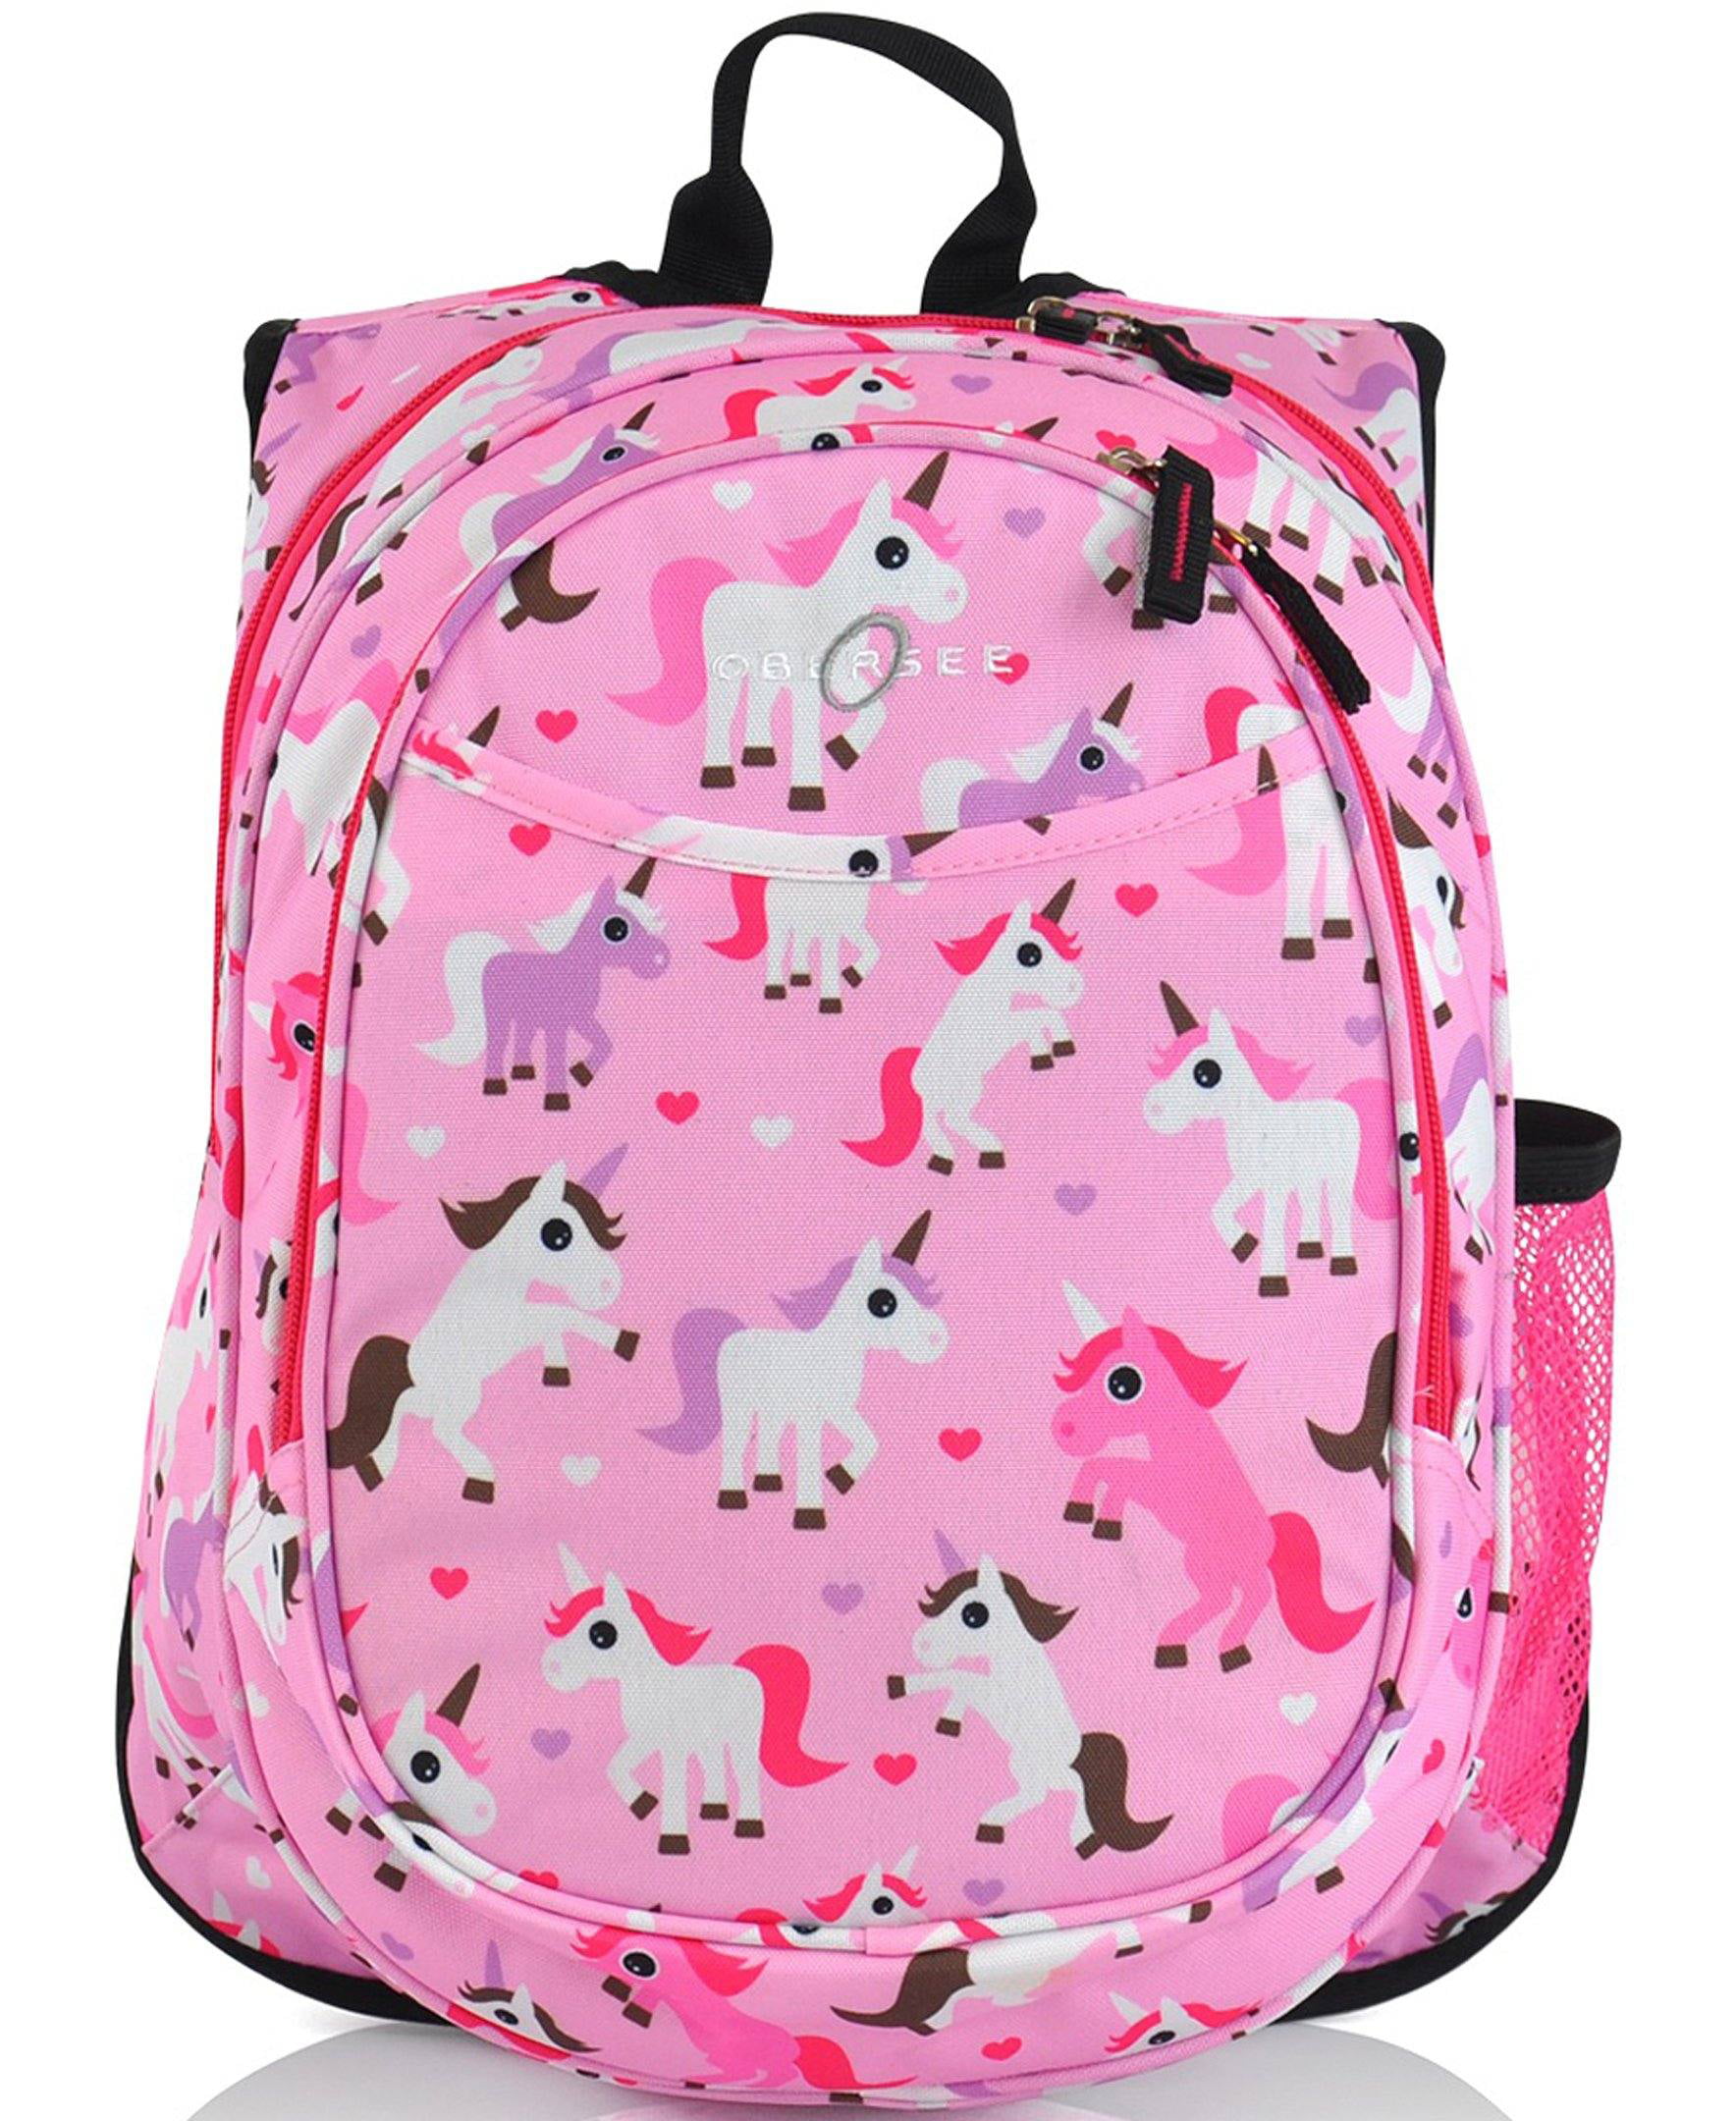 Camo 1 Pack Obersee Kids All-in-One Pre-School Backpacks with Integrated Cooler